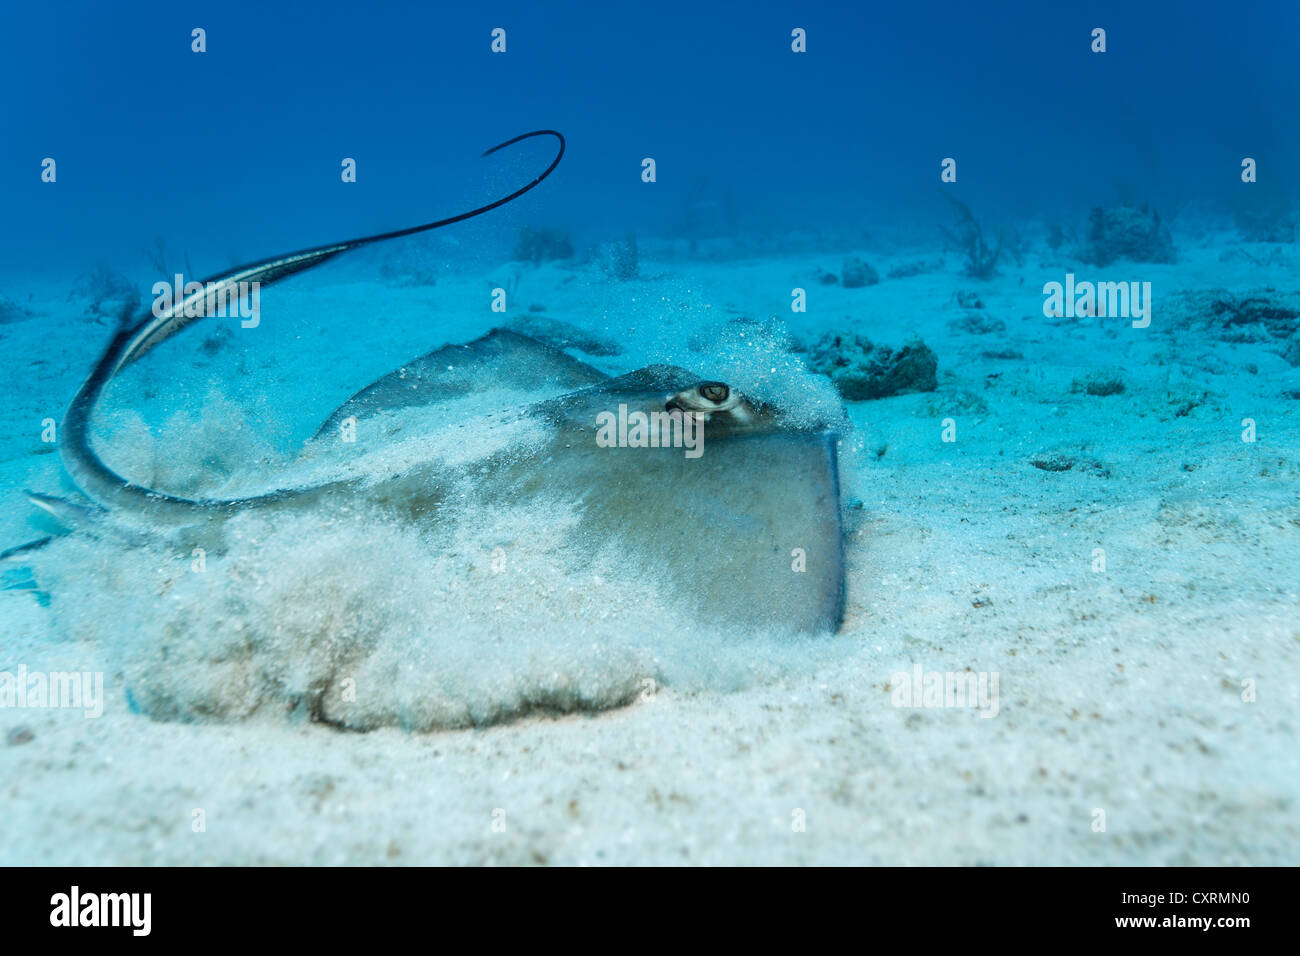 Southern Stingray (Dasyatis americana) taking off from sandy ocean floor whipping its tail, Republic of Cuba, Caribbean Sea Stock Photo